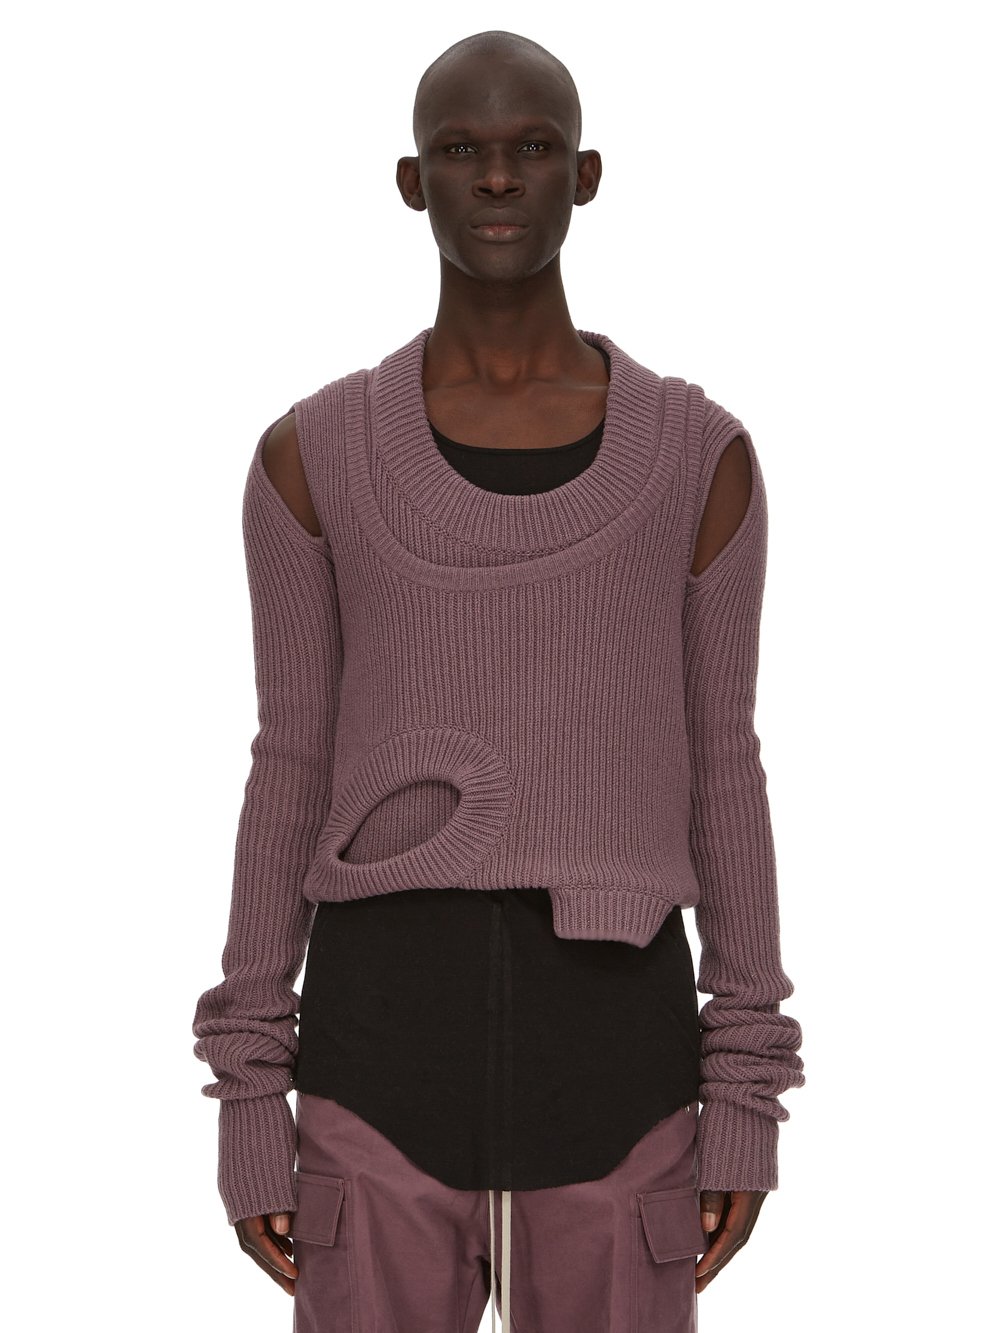 RICK OWENS FW23 LUXOR BANANA LS IN AMETHYST PURPLE RECYCLED CASHMERE KNIT